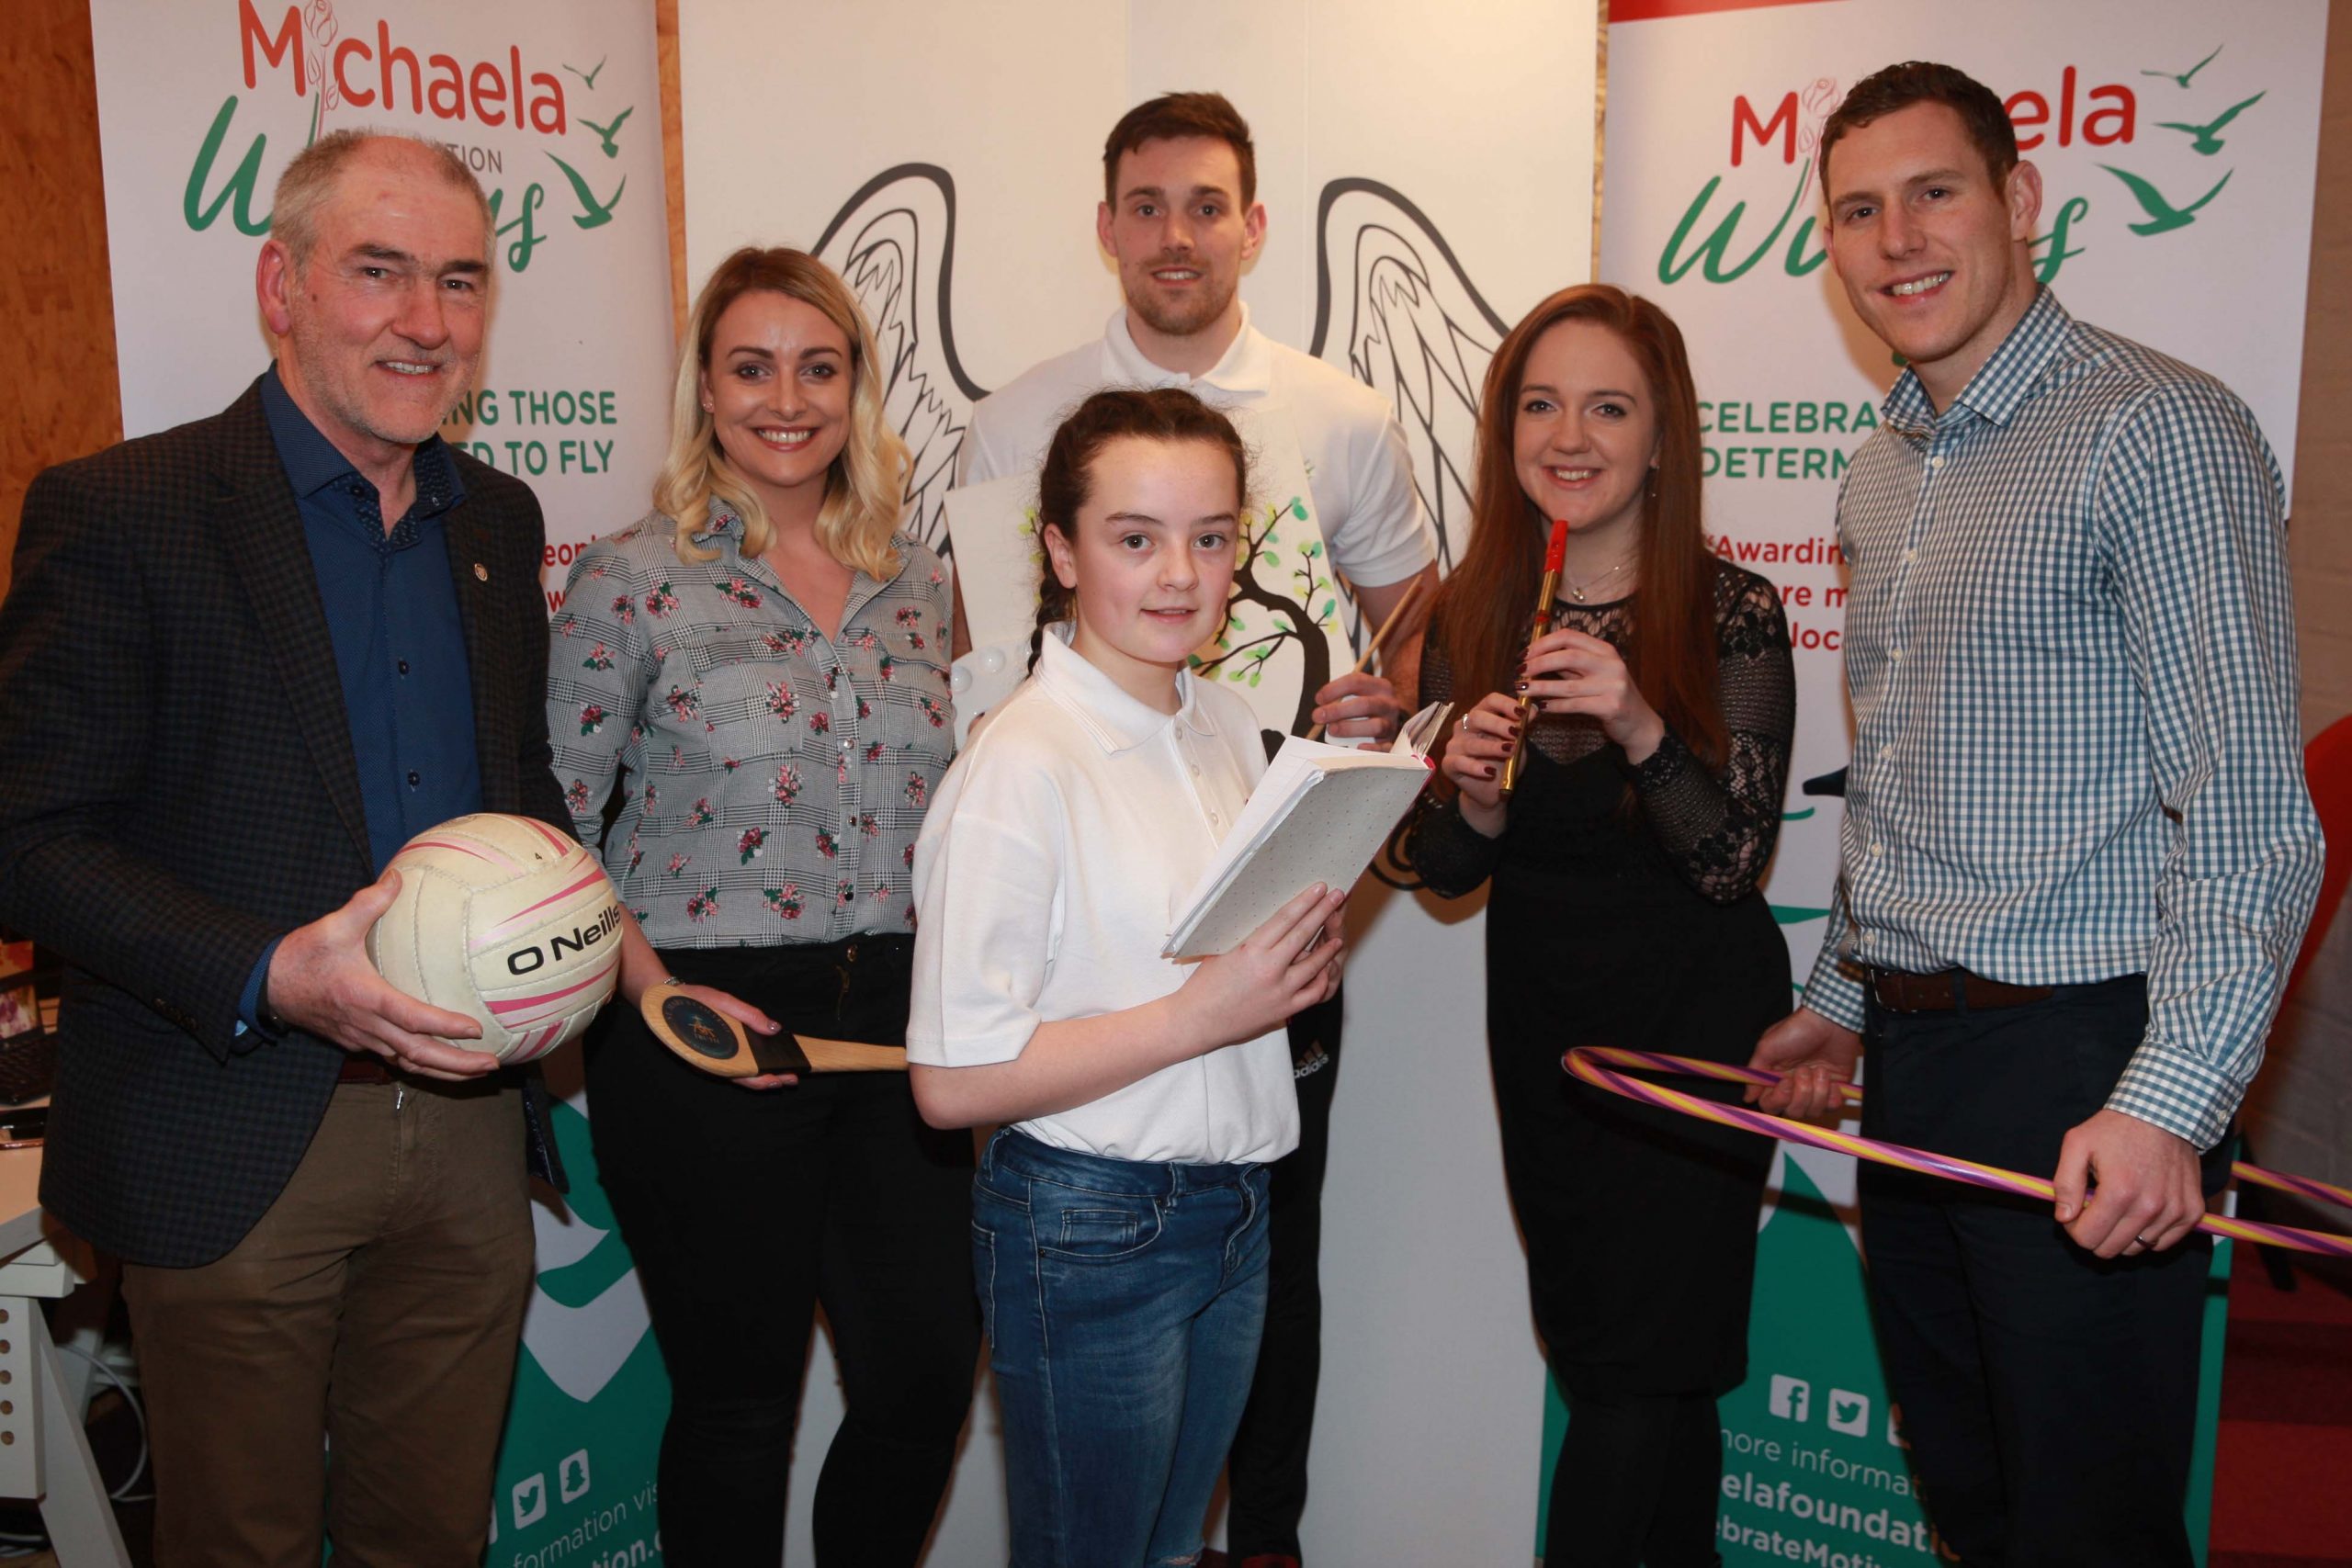 Michaela Foundation Wings Award to celebrate young people in the community